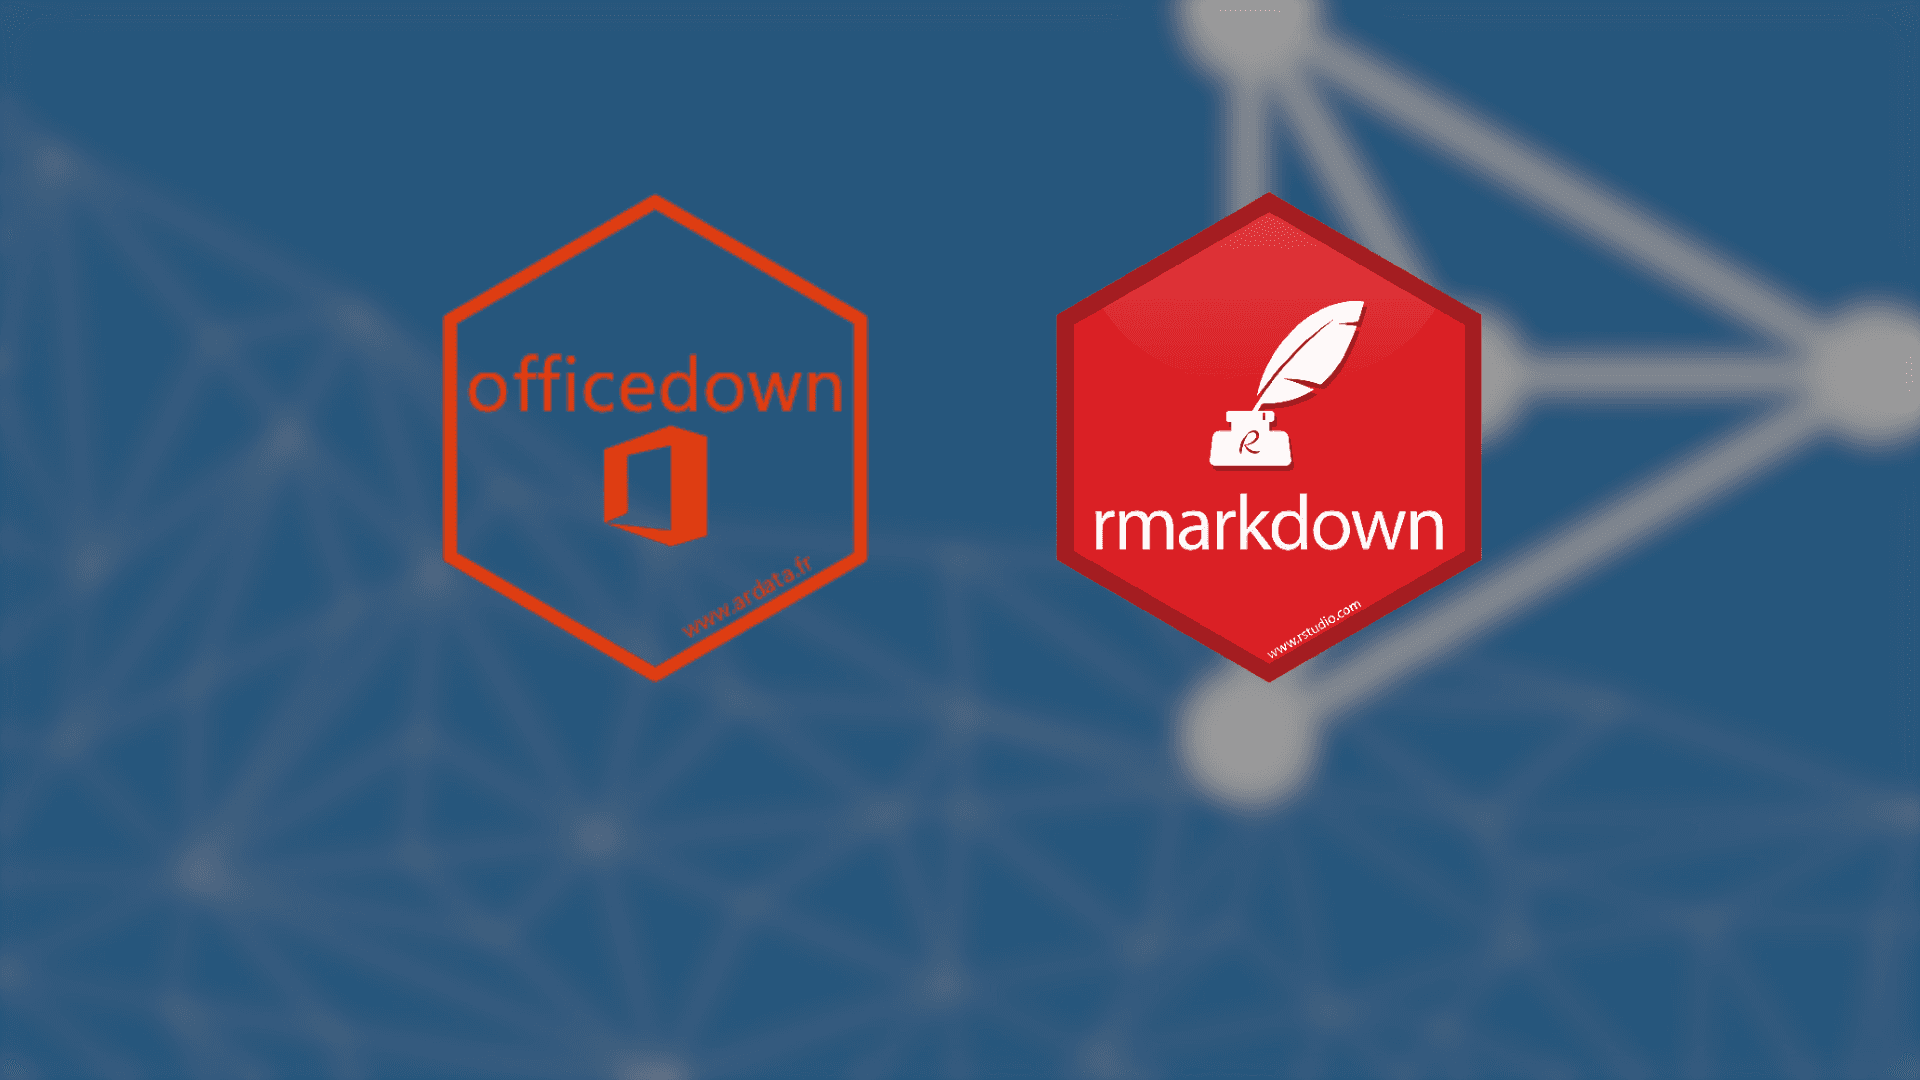 hero showing officedown and rmarkdown package logos